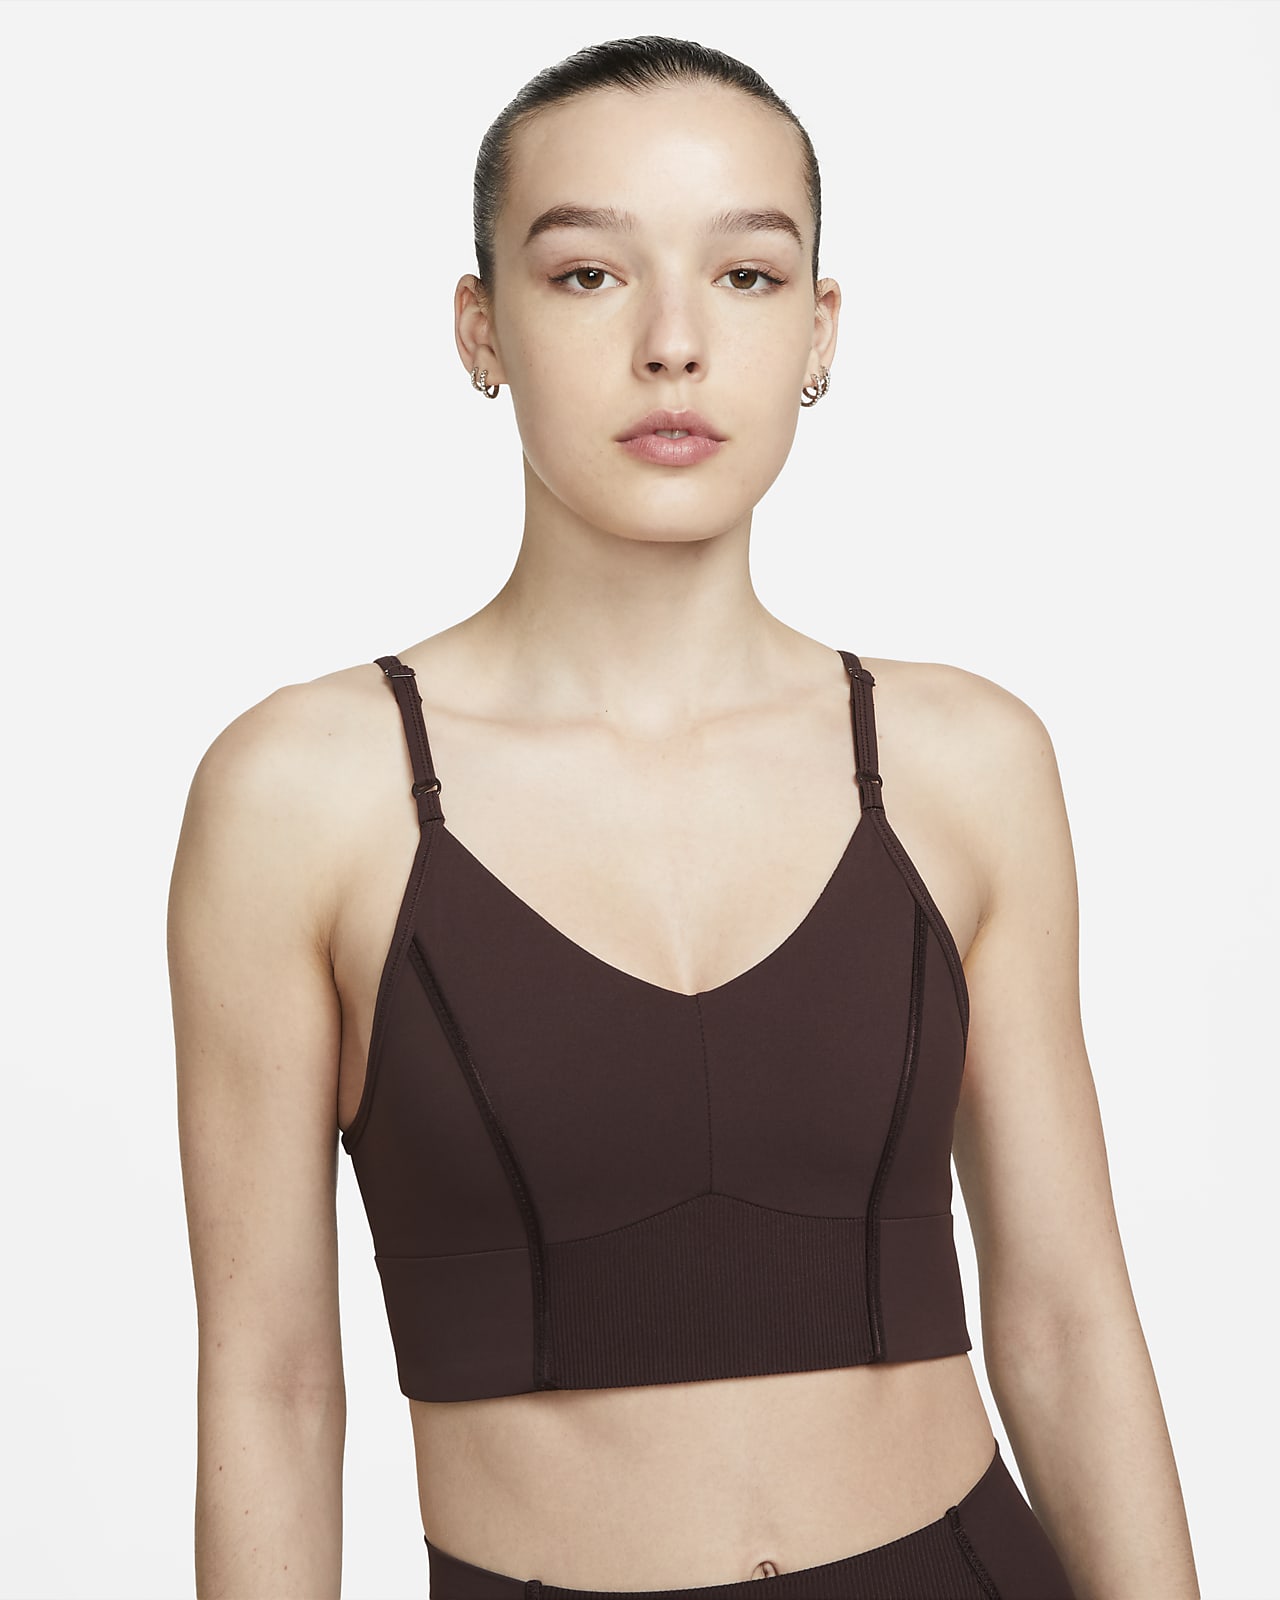 Nike One Training Plus Indy dri fit light support sports bra in